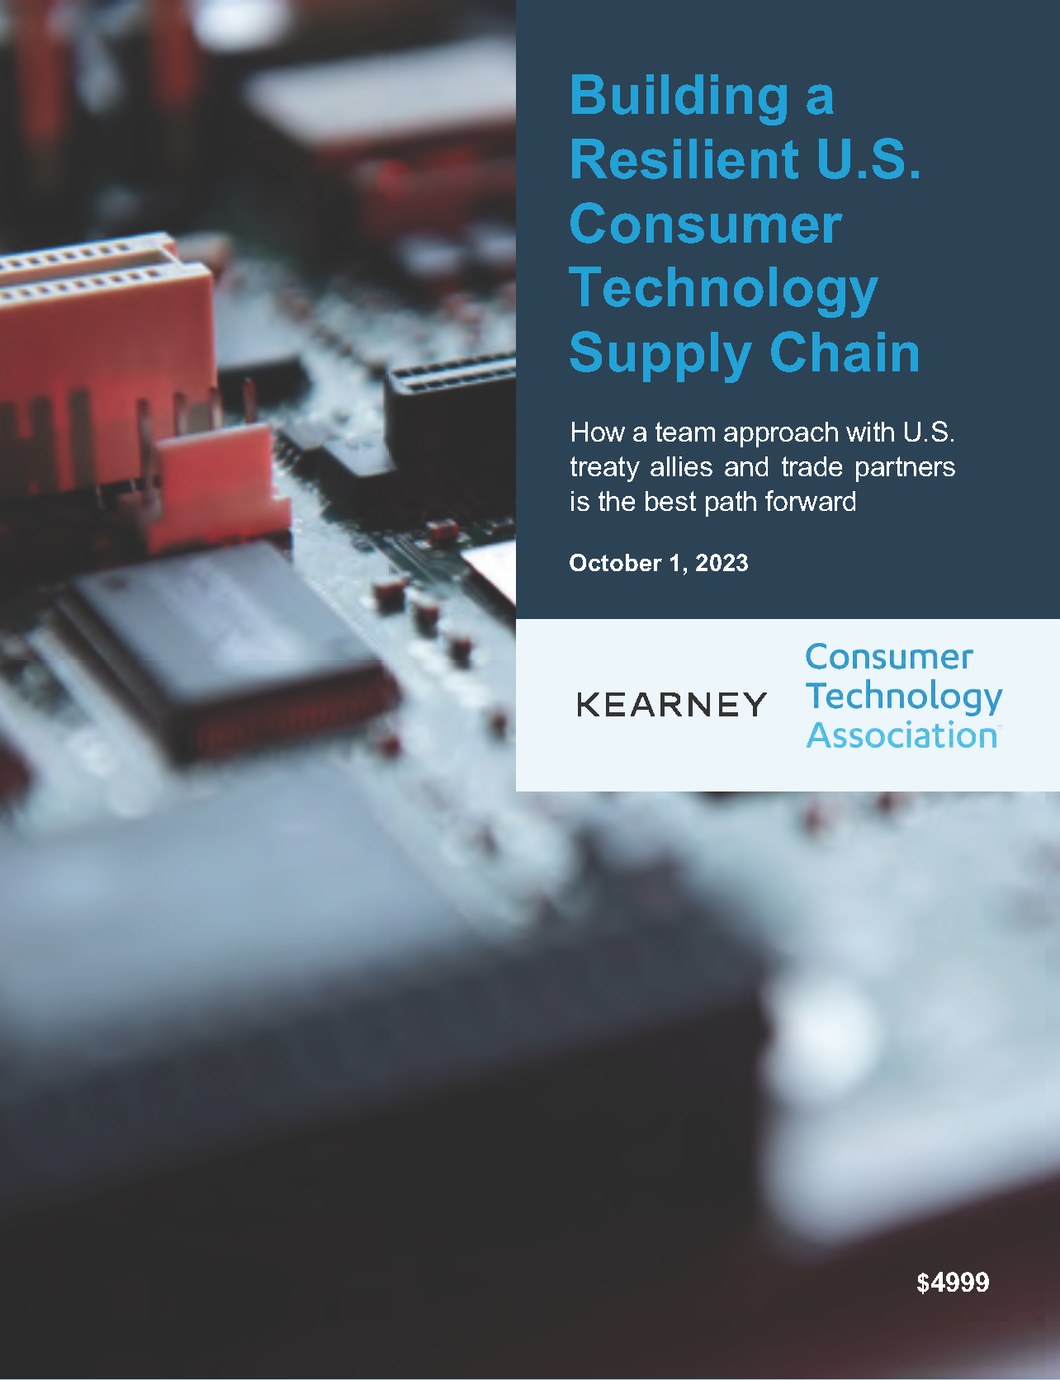 Building a Resilient U.S. Consumer Technology Supply Chain